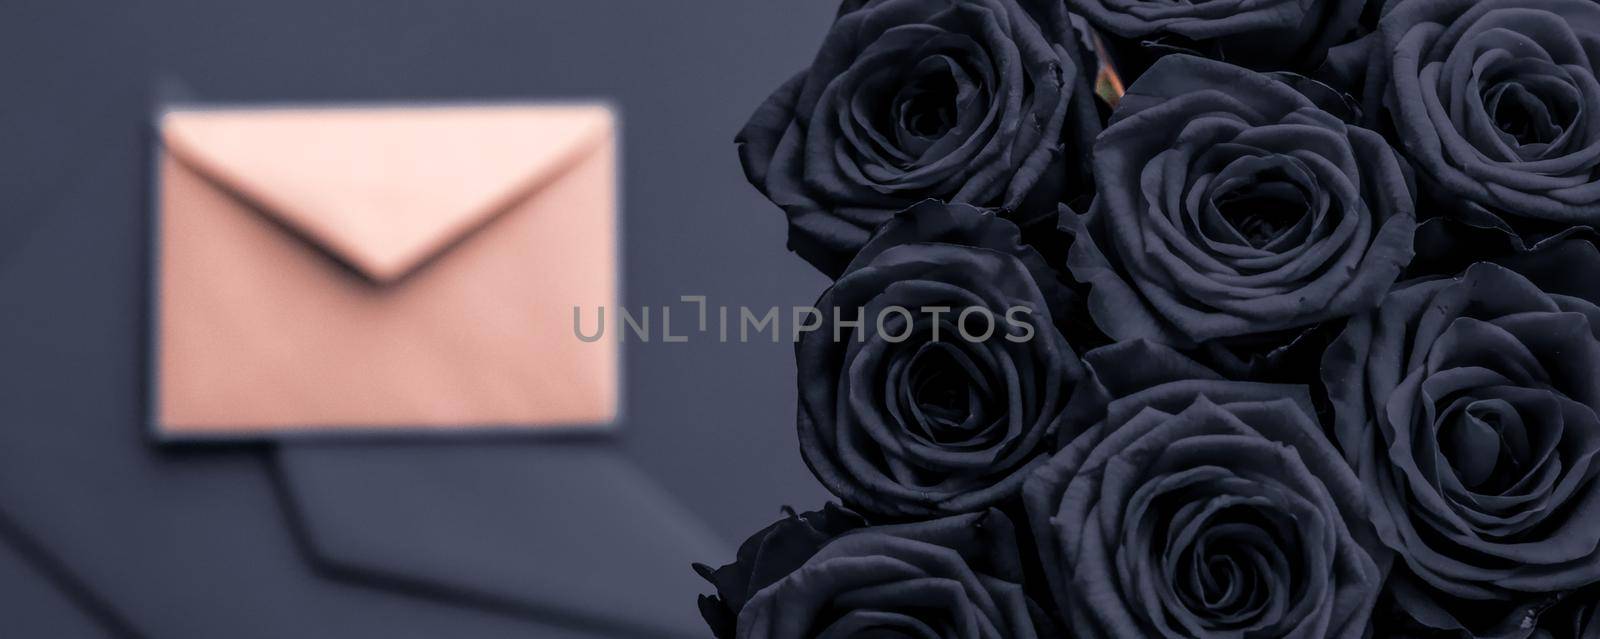 Love letter and flowers delivery on Valentines Day, luxury bouquet of roses and card on charcoal background for romantic holiday design by Anneleven